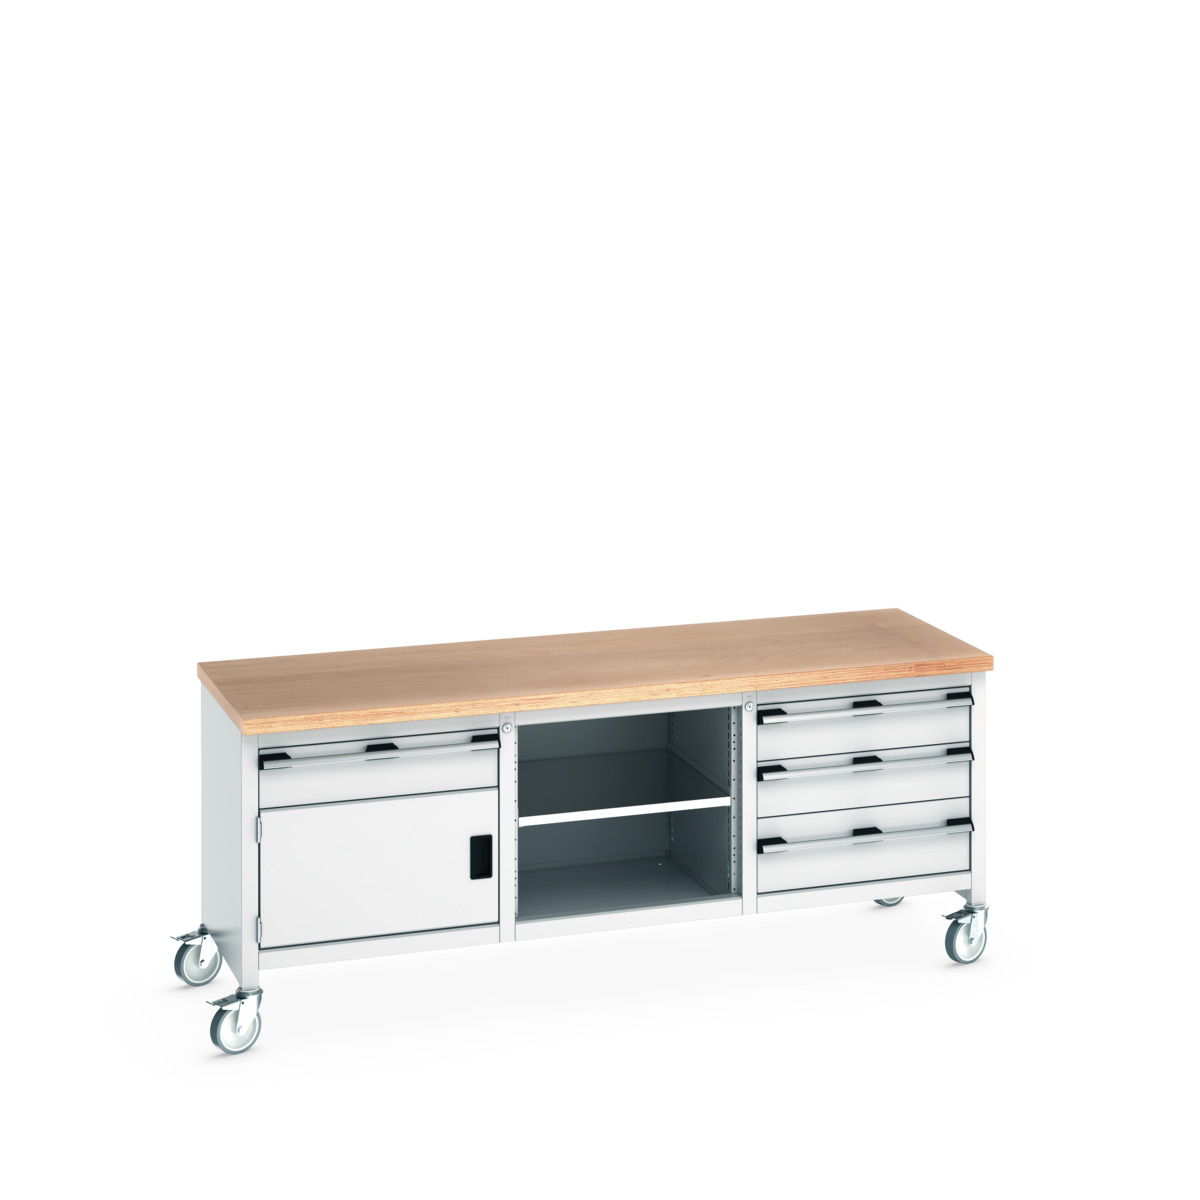 41002127.16V - cubio mobile storage bench (mpx)